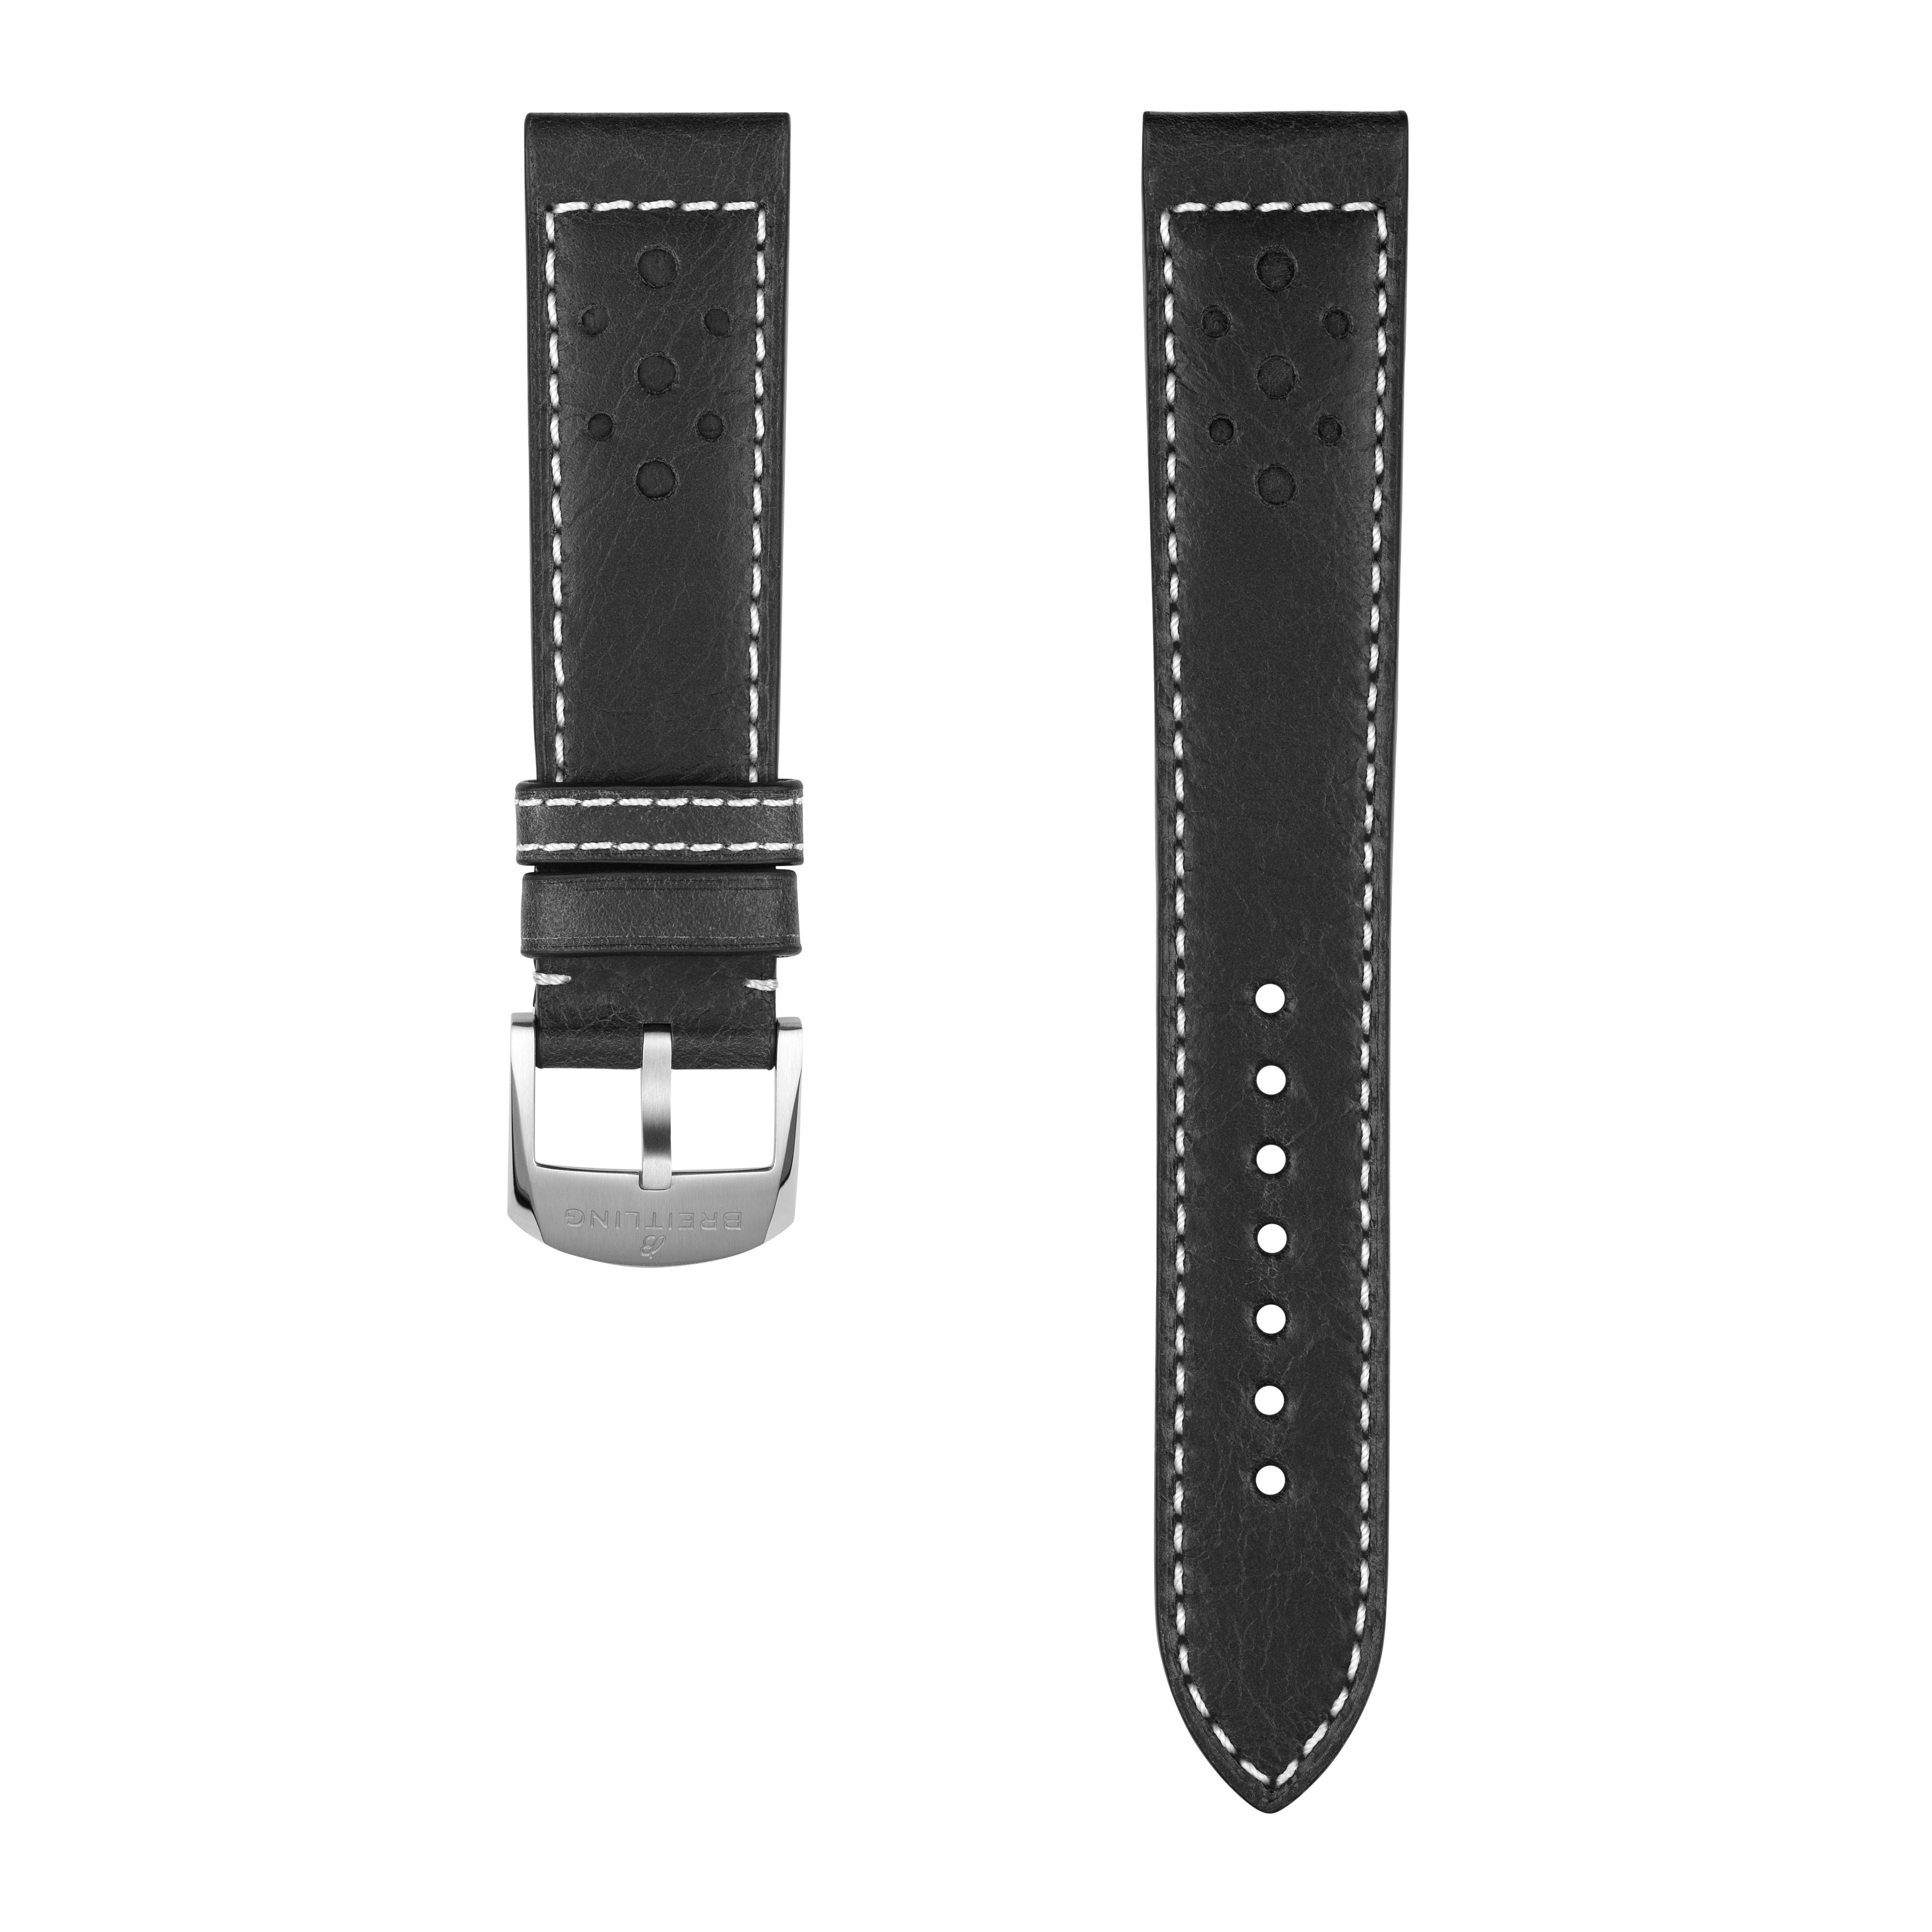 Black racing-themed calfskin leather strap - 20 mm